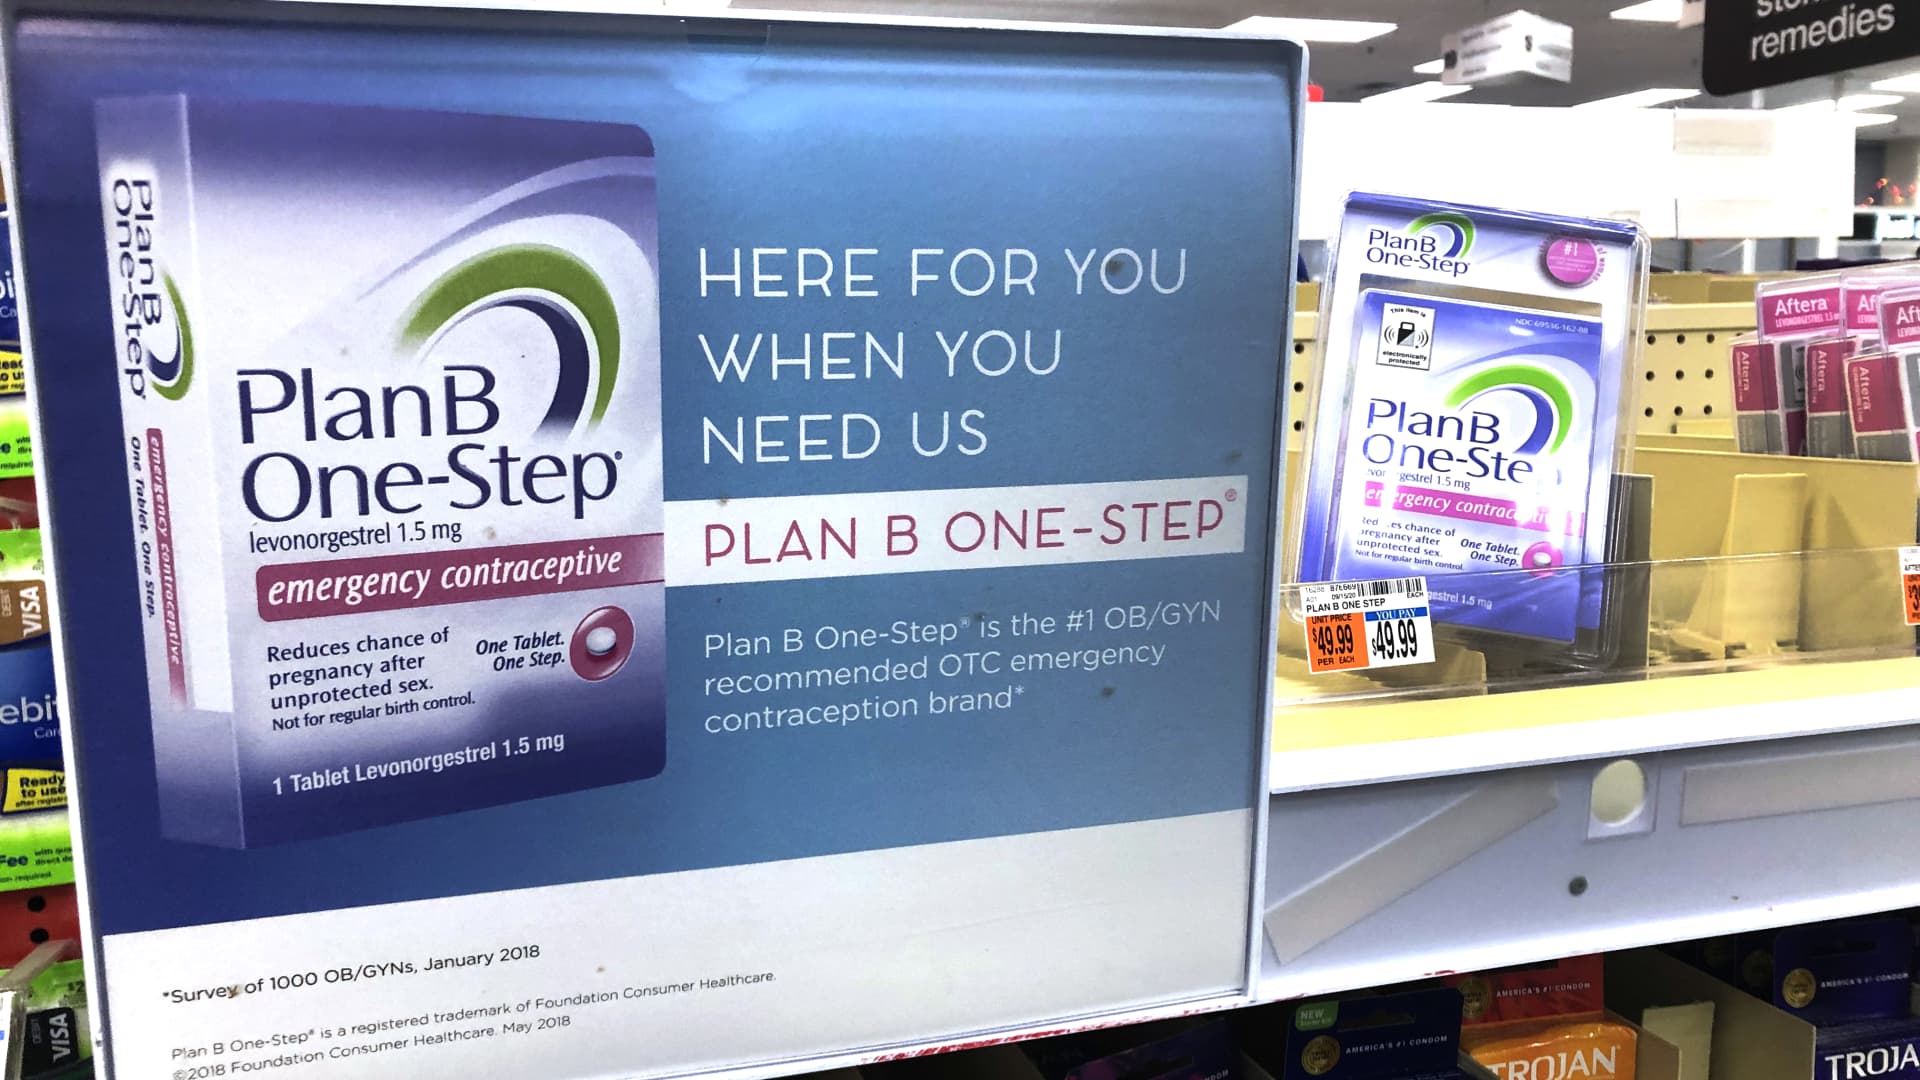 Amazon, RiteAid set purchase limits on Plan B: Where to get emergency contraceptives outside major retailers